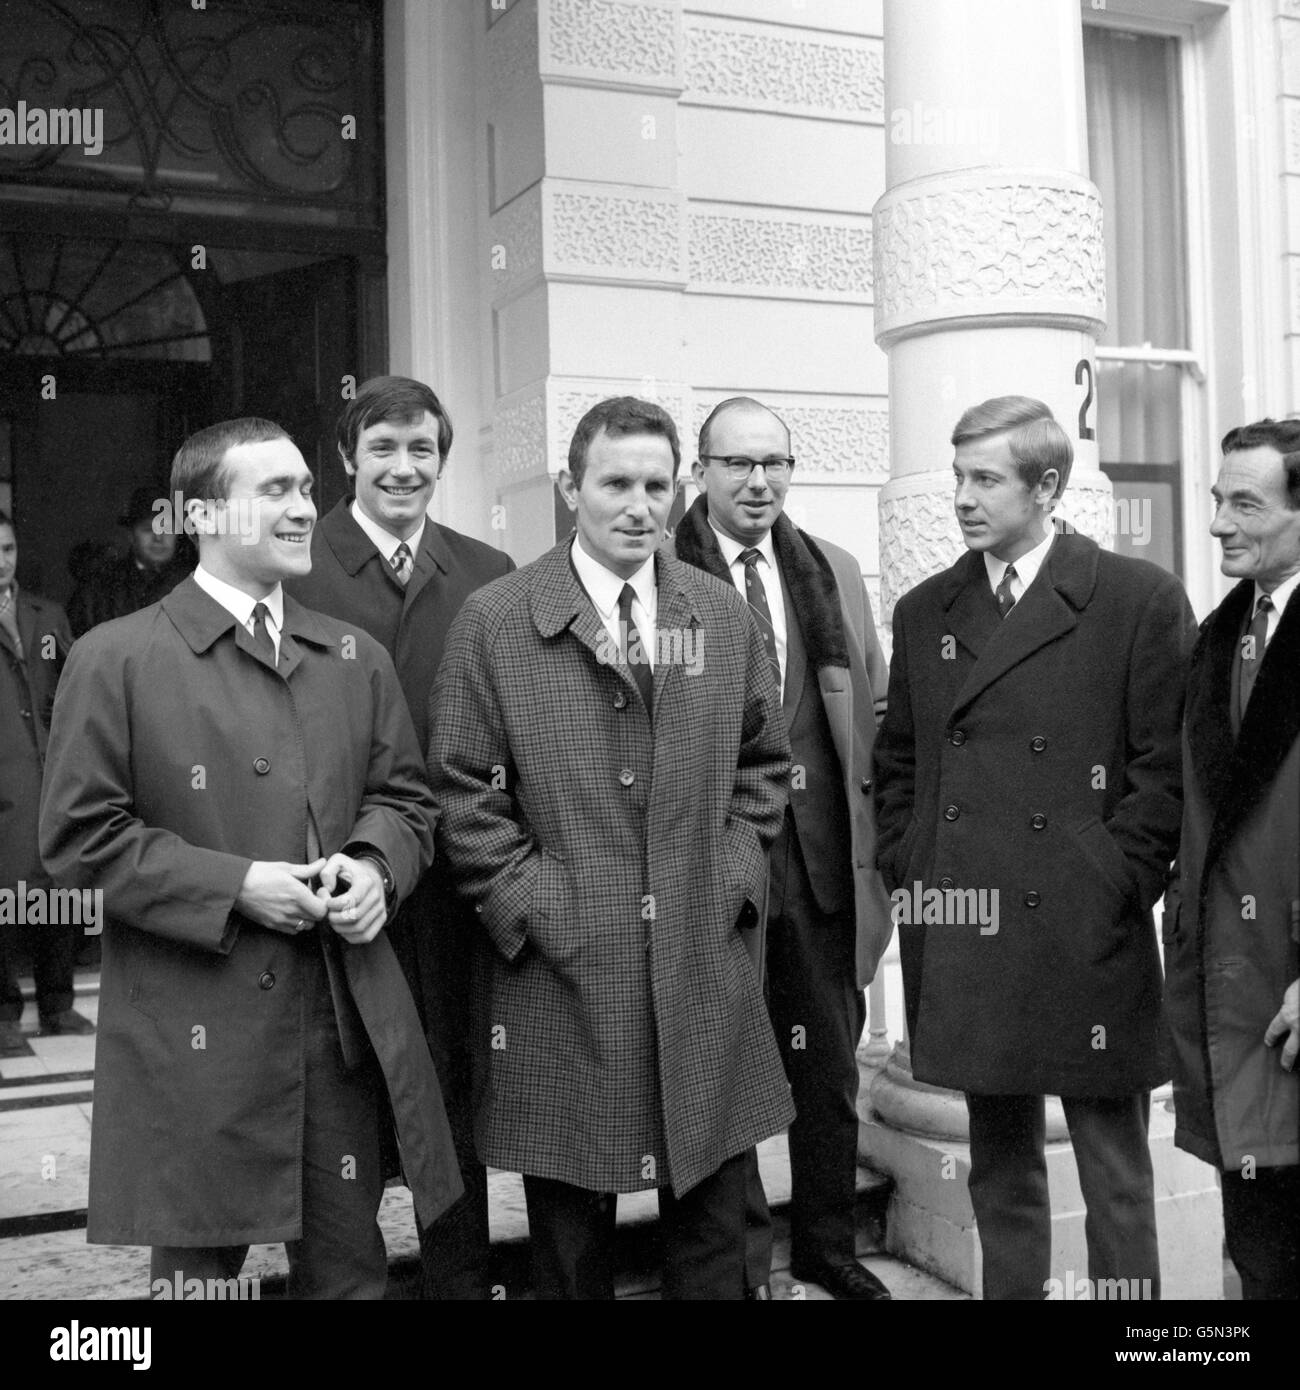 John Boyle (second from left) leaves the FA's headquarters in Lancaster Gate, London, after a disciplinary committee decided that no further action should be taken, following his red card in a match against Manchester City. With him are other Chelsea players and officials - (l-r) Ron Harris, (John Boyle), manager Dave Sexton, assistant secretary Alan Bennett and Alan Birchenall. Stock Photo